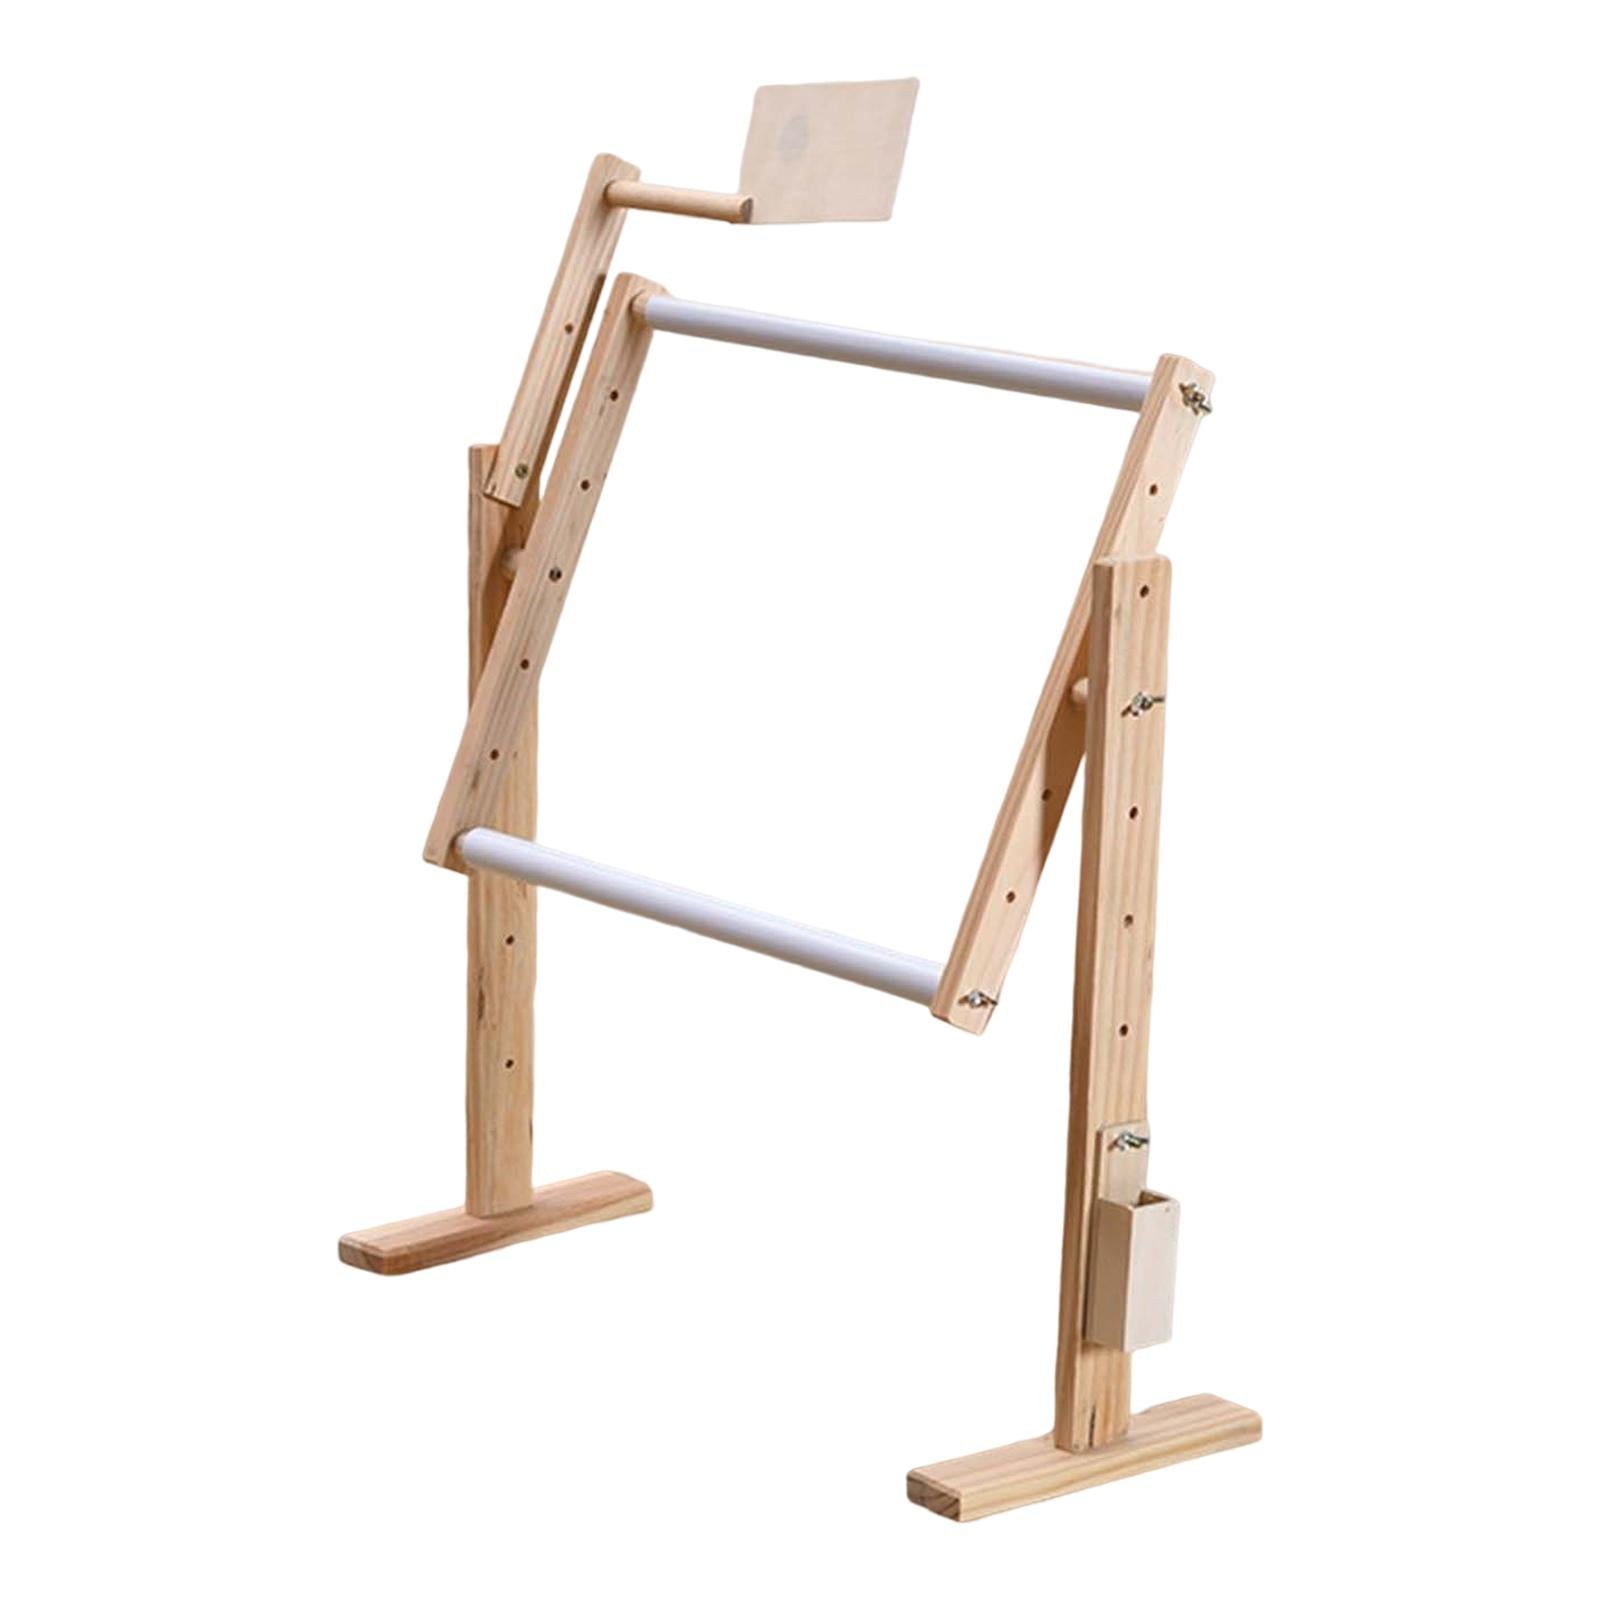 Easel Display Stand for Embroidery, Wood Holder for Small Art